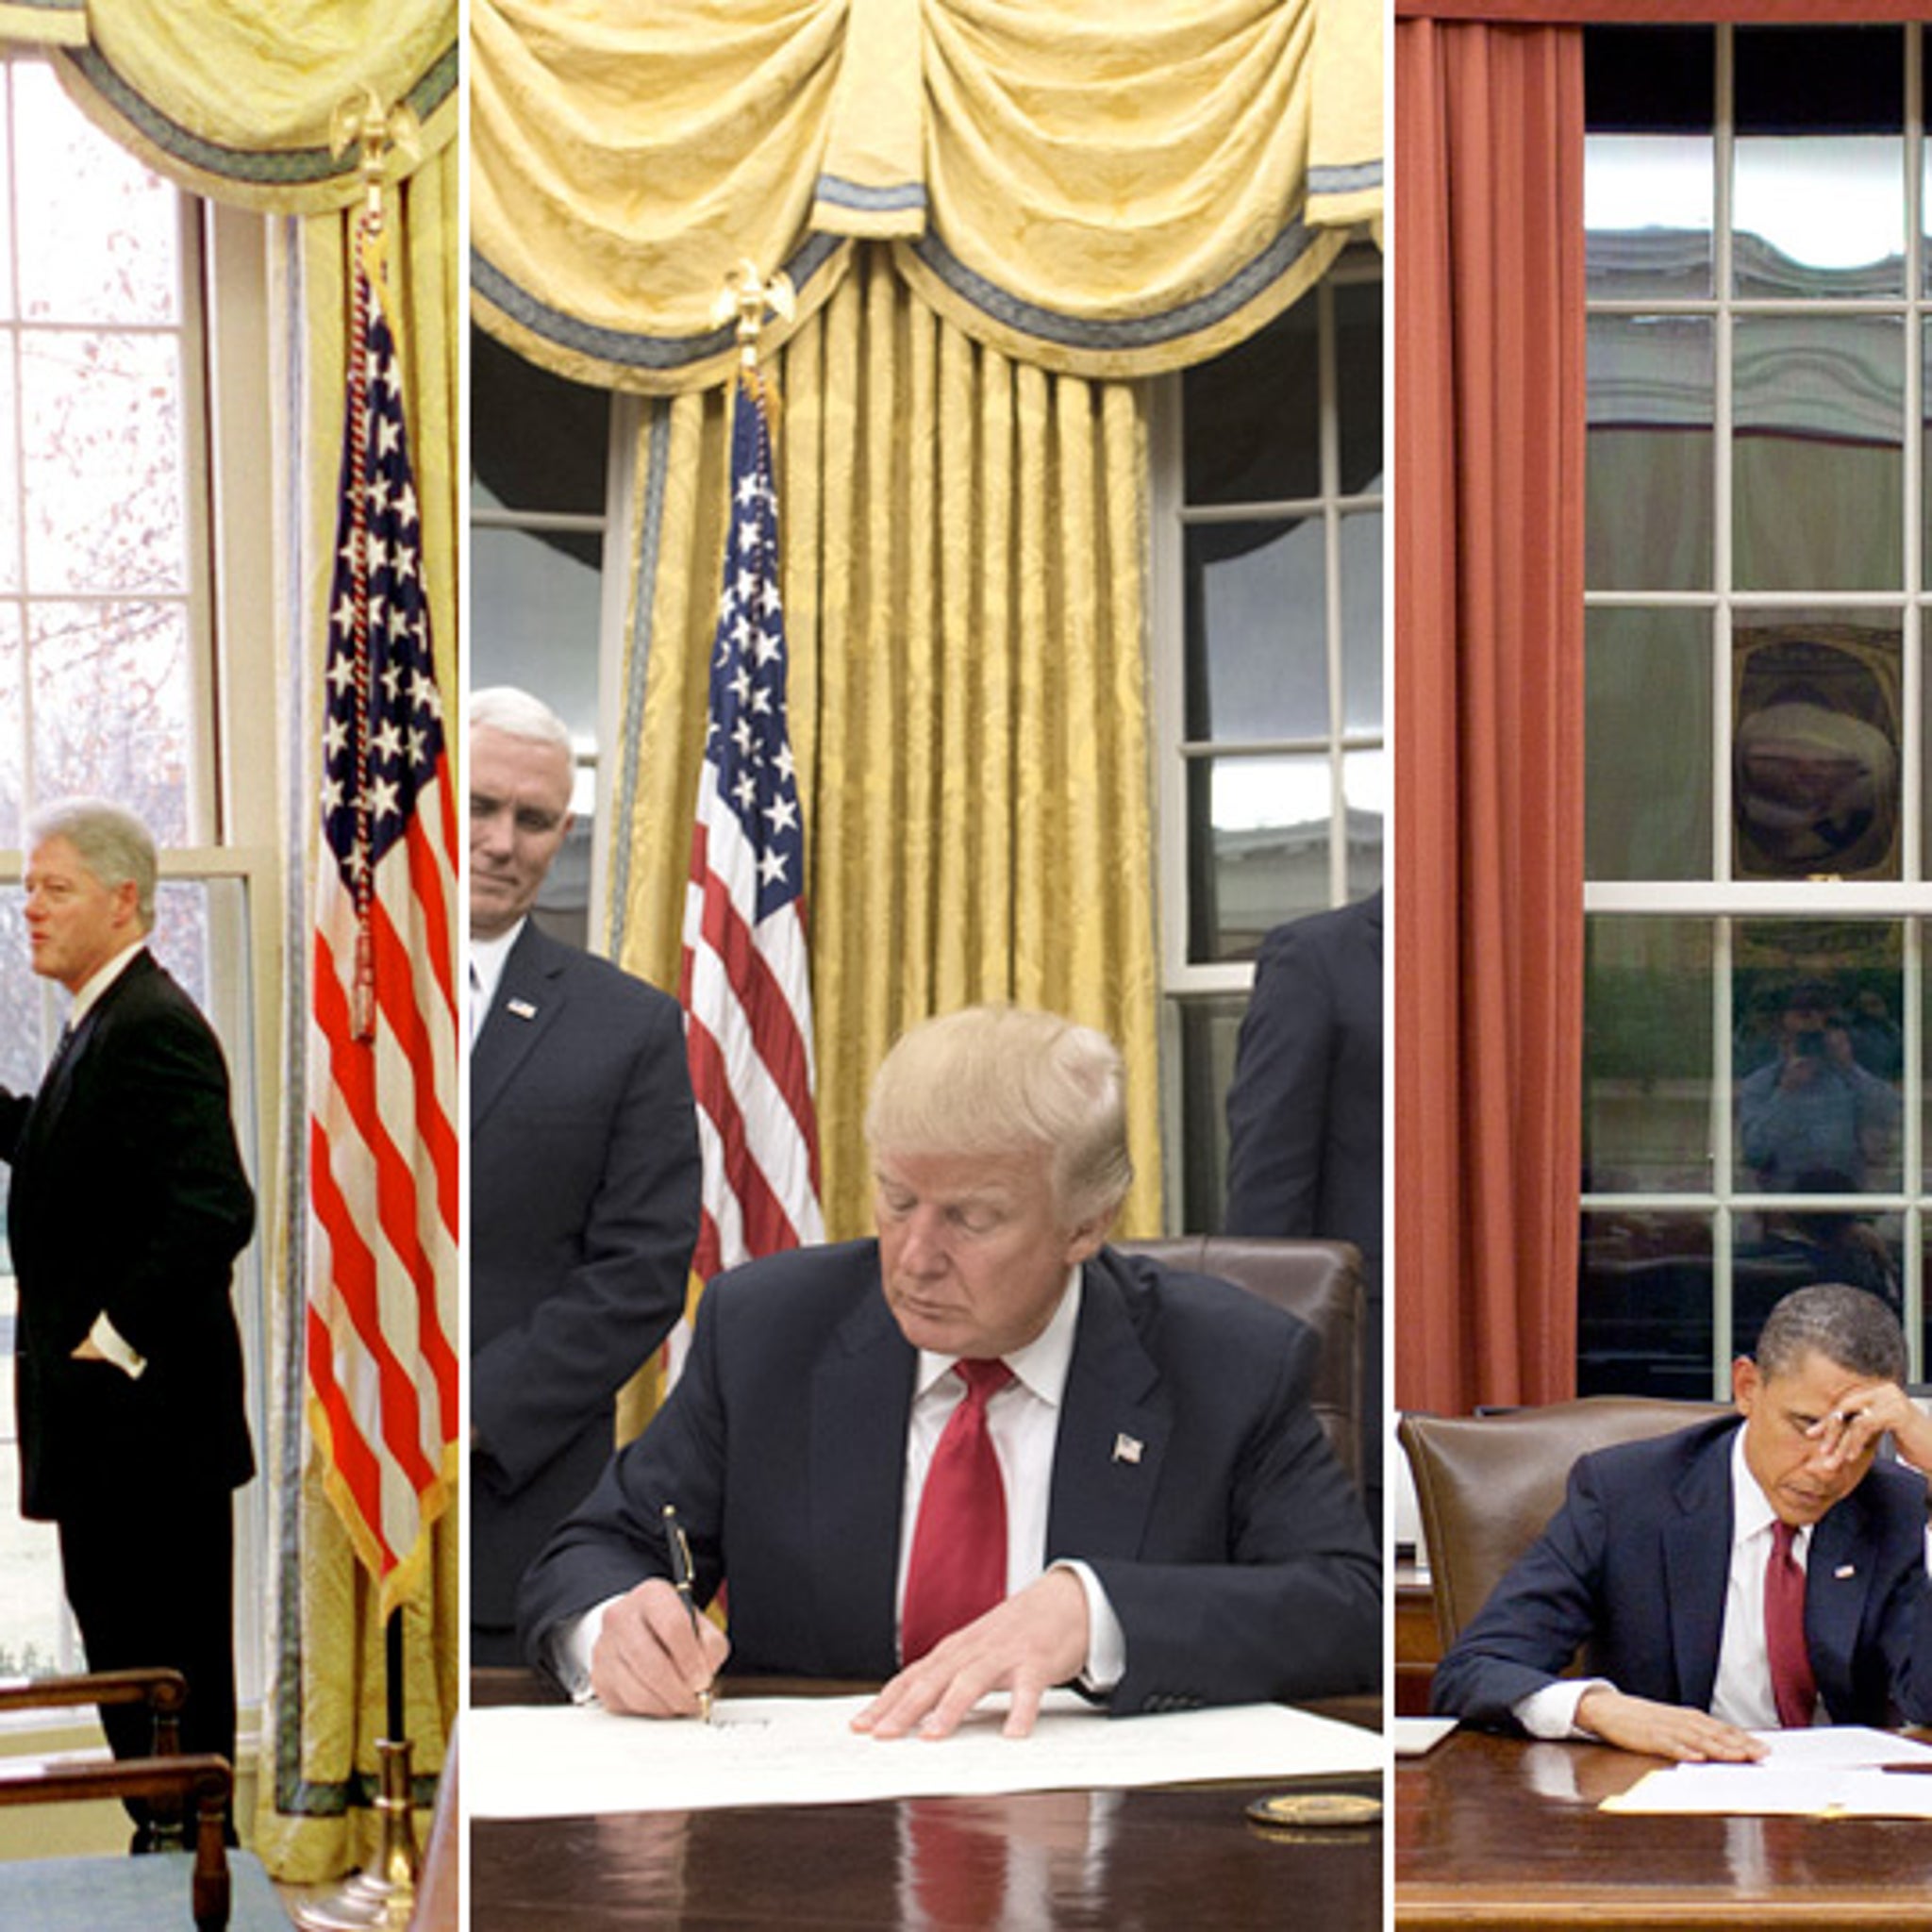 Donald Trump Chooses Same Curtains for Oval Office as Hillary Clinton